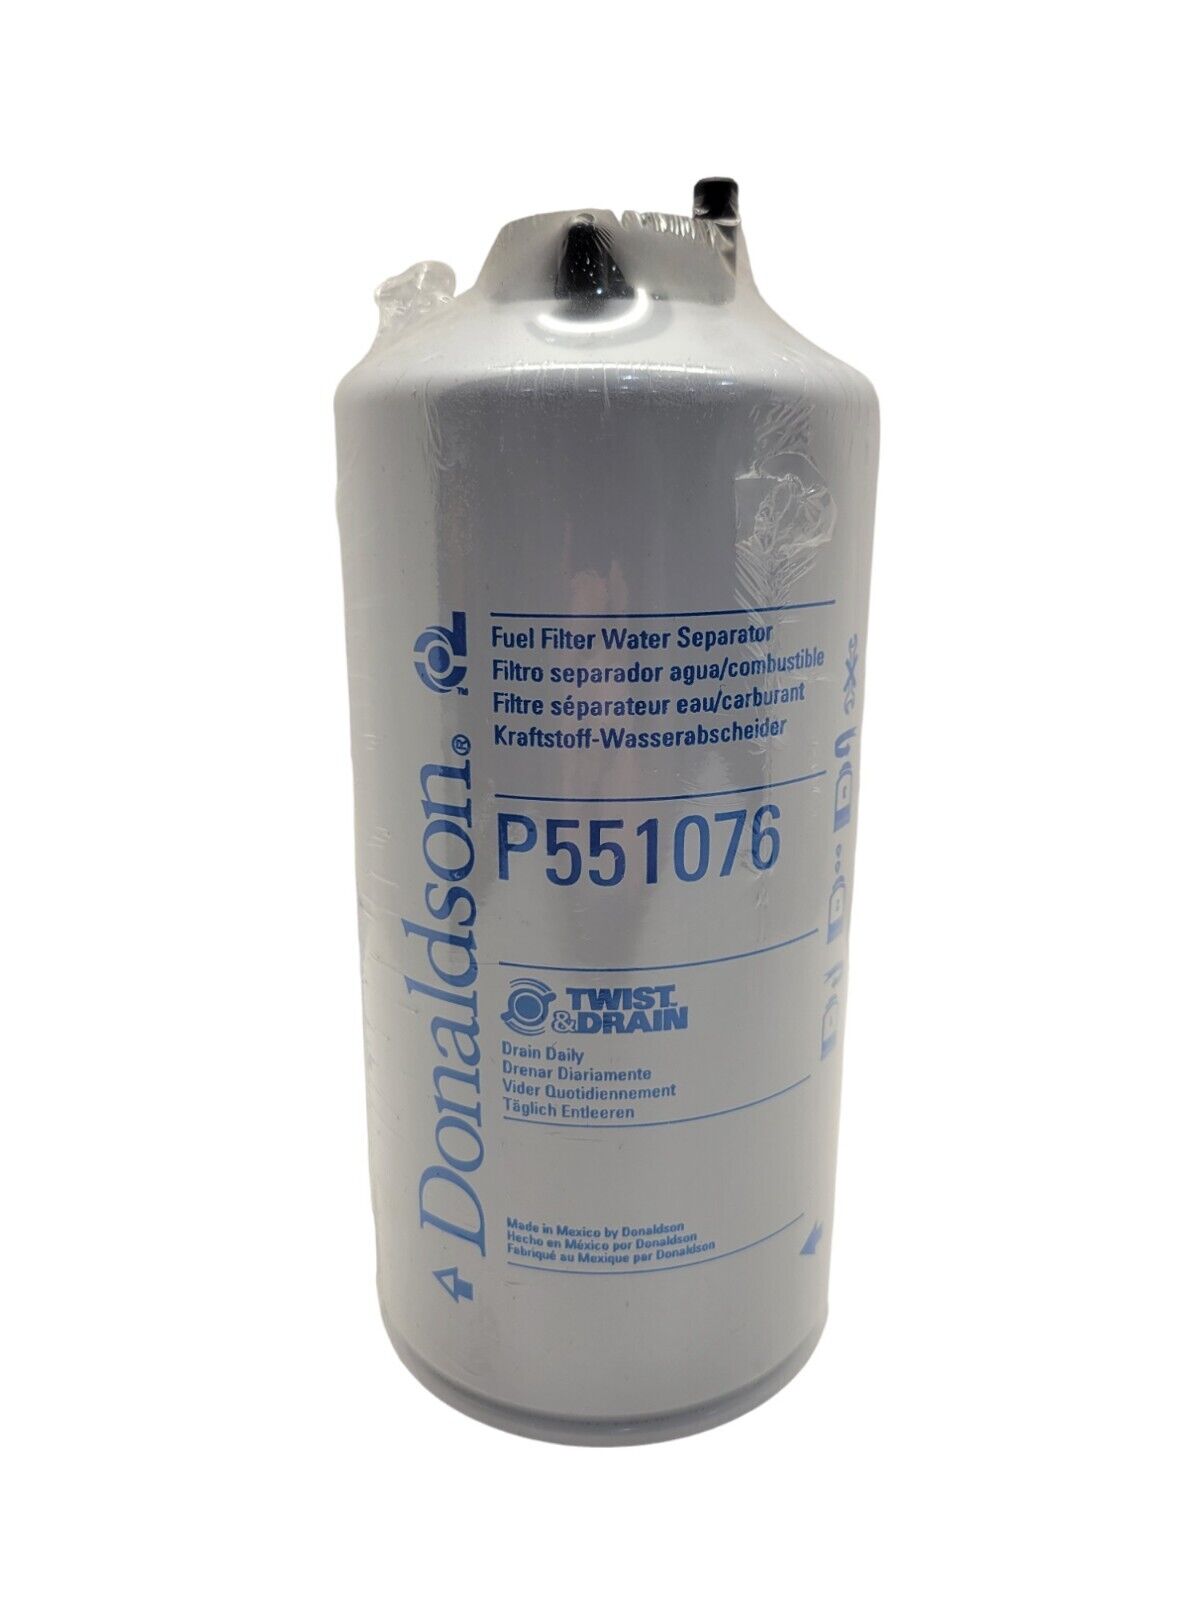 SMALL DENT New and Genuine P551076 Donaldson Fuel Filter Water Separator